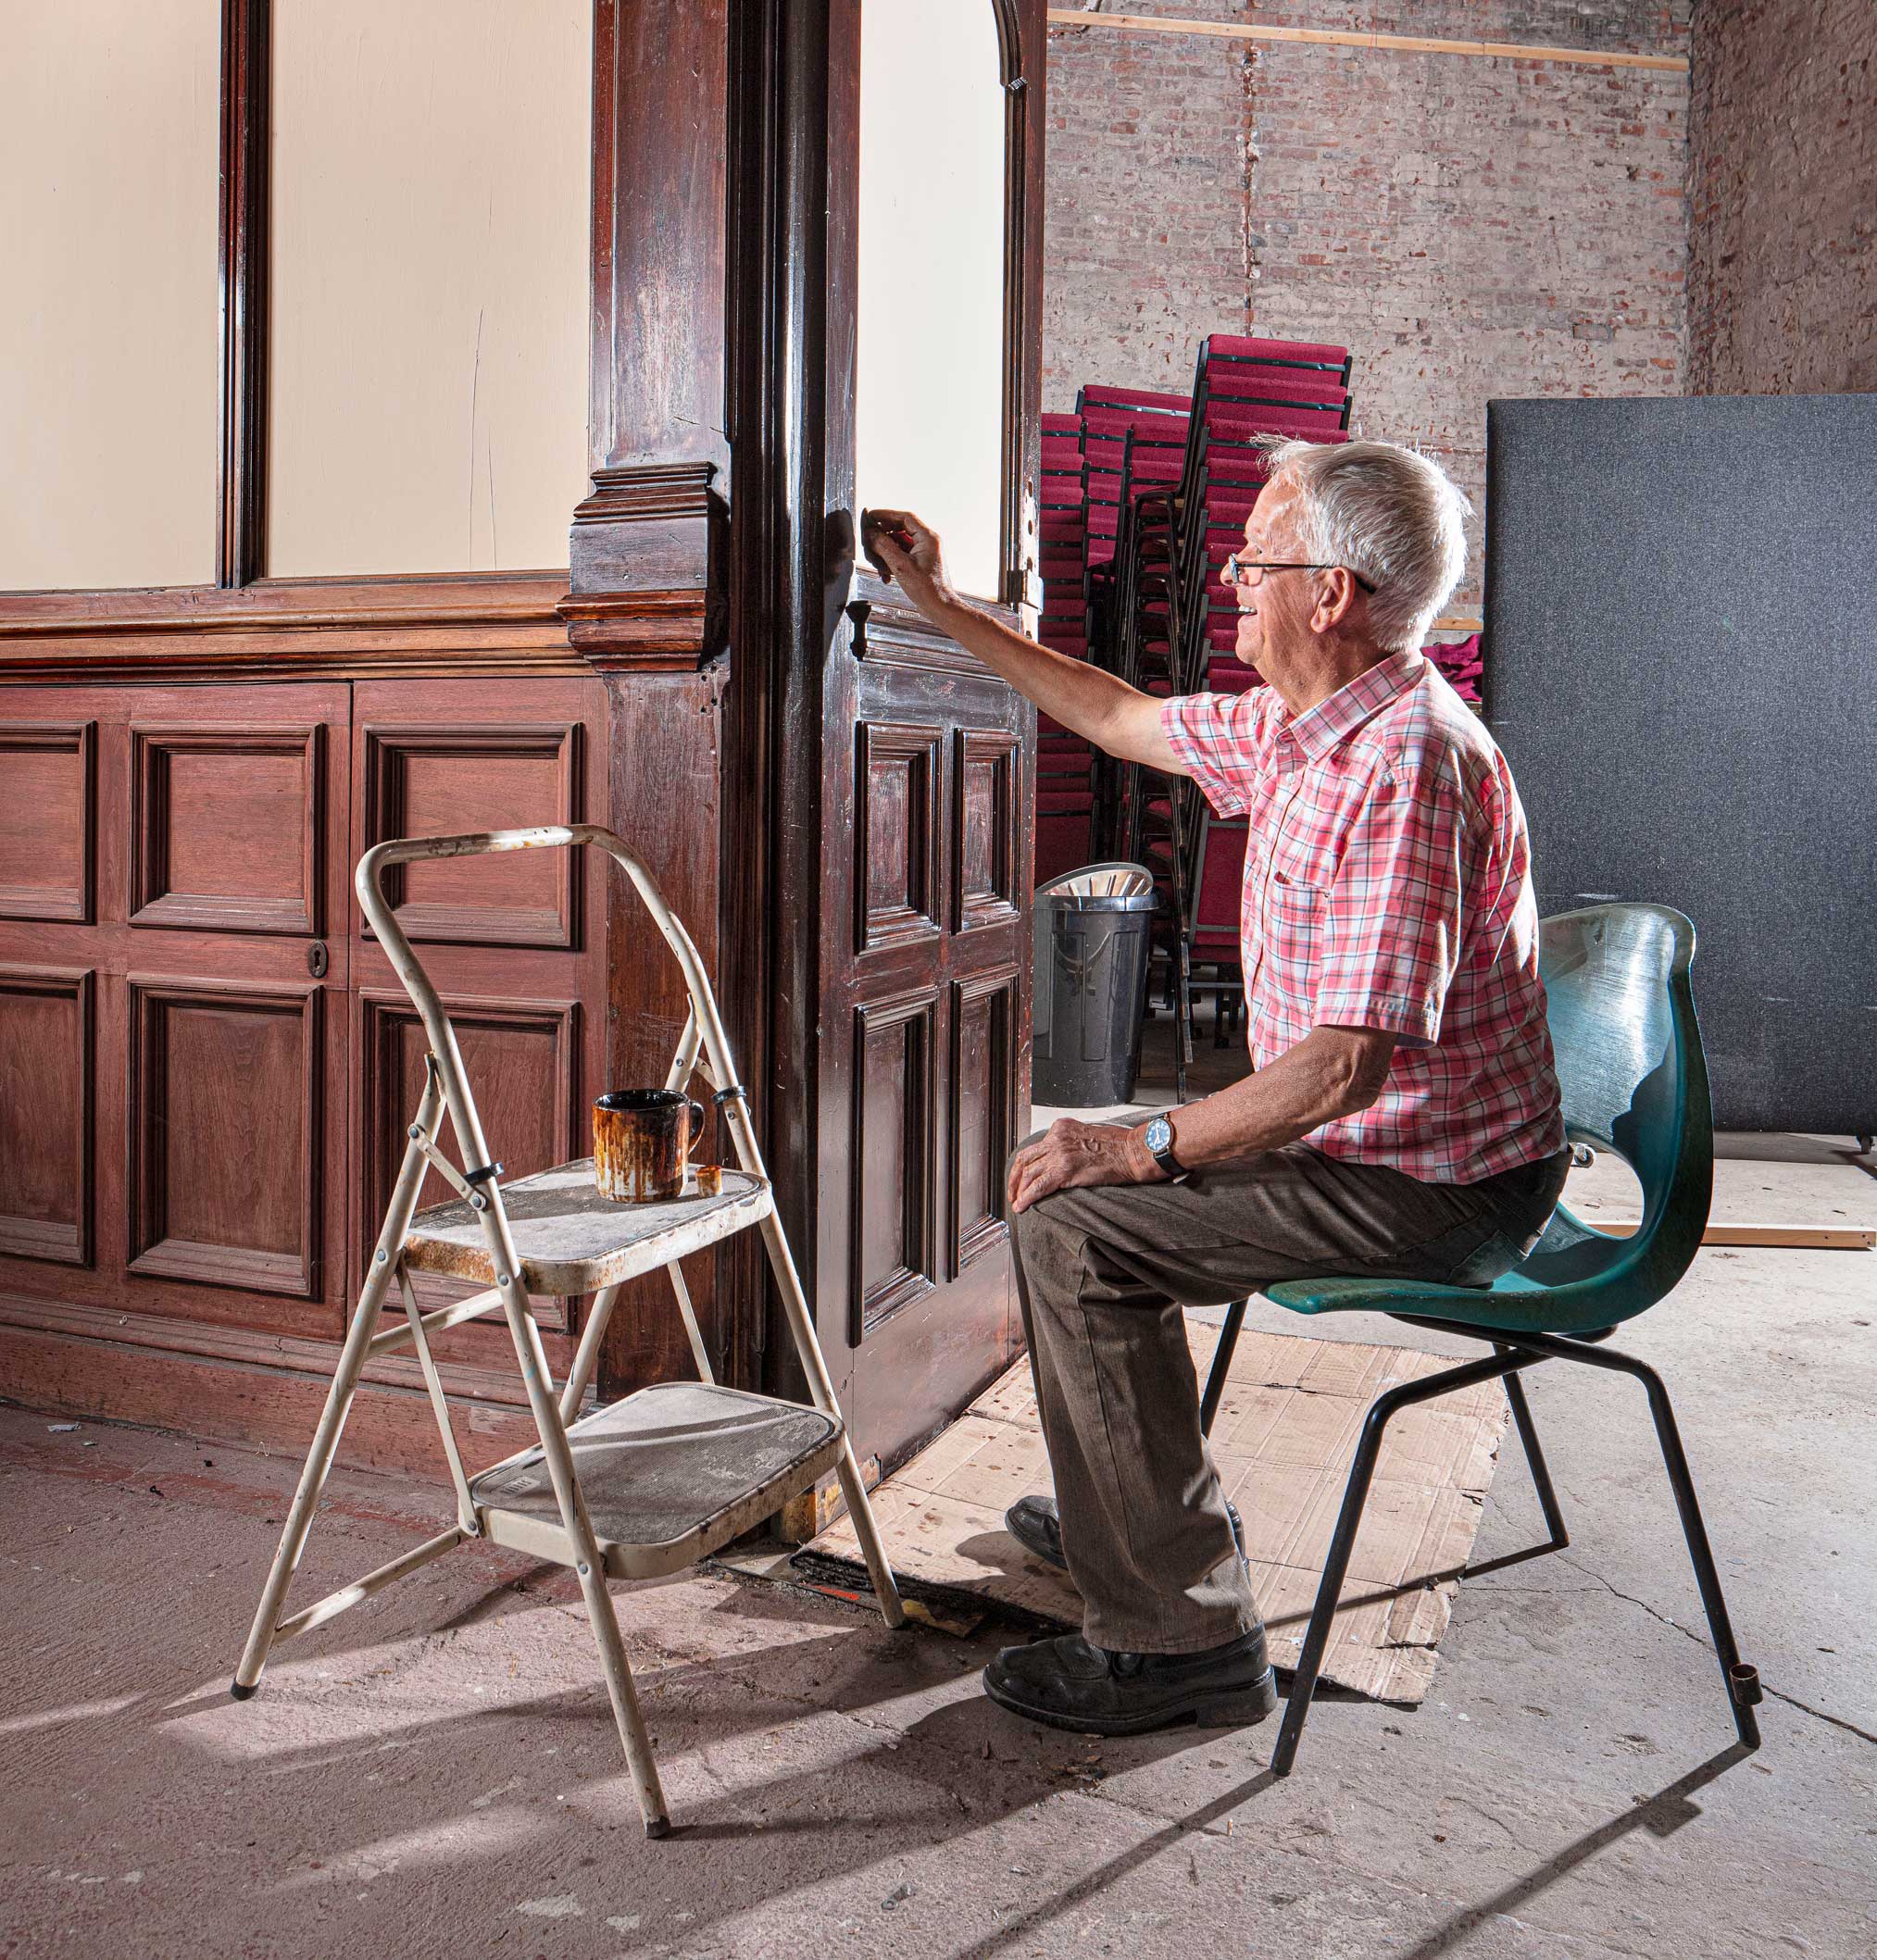 An older man seated in front of historic wood paneling which he is restoring.